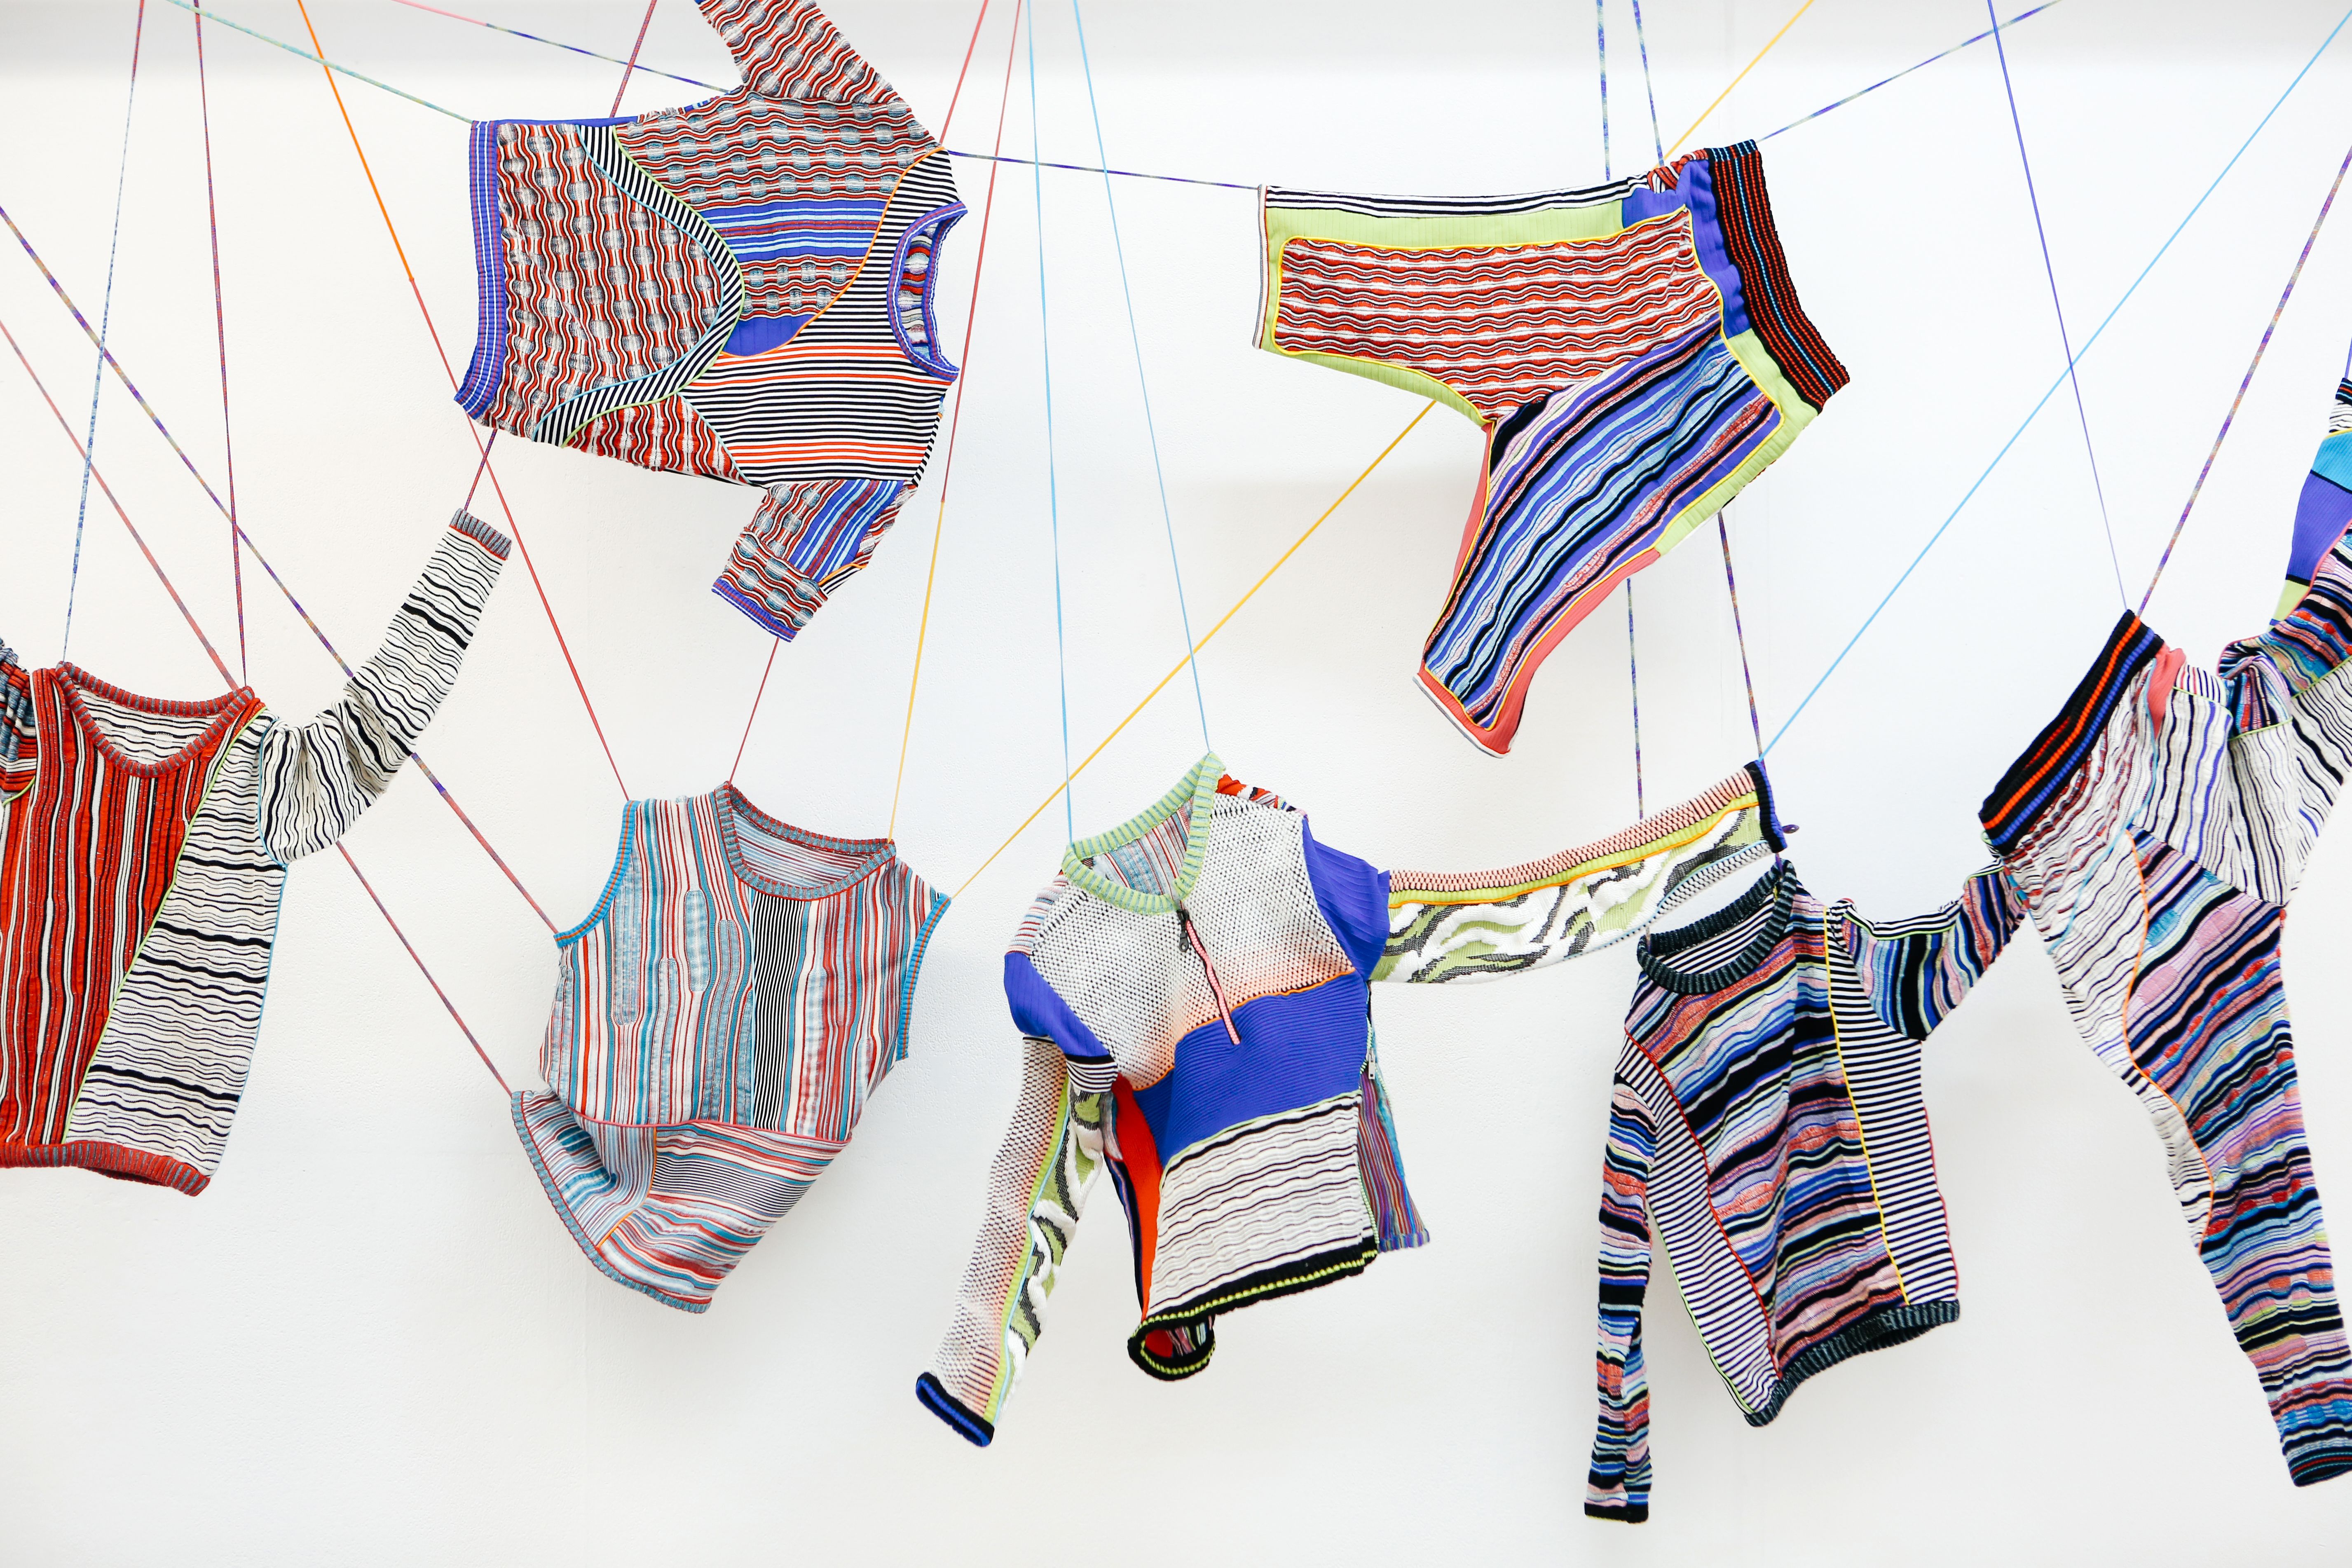 Colourful knitted jumpers hang on a web of thread